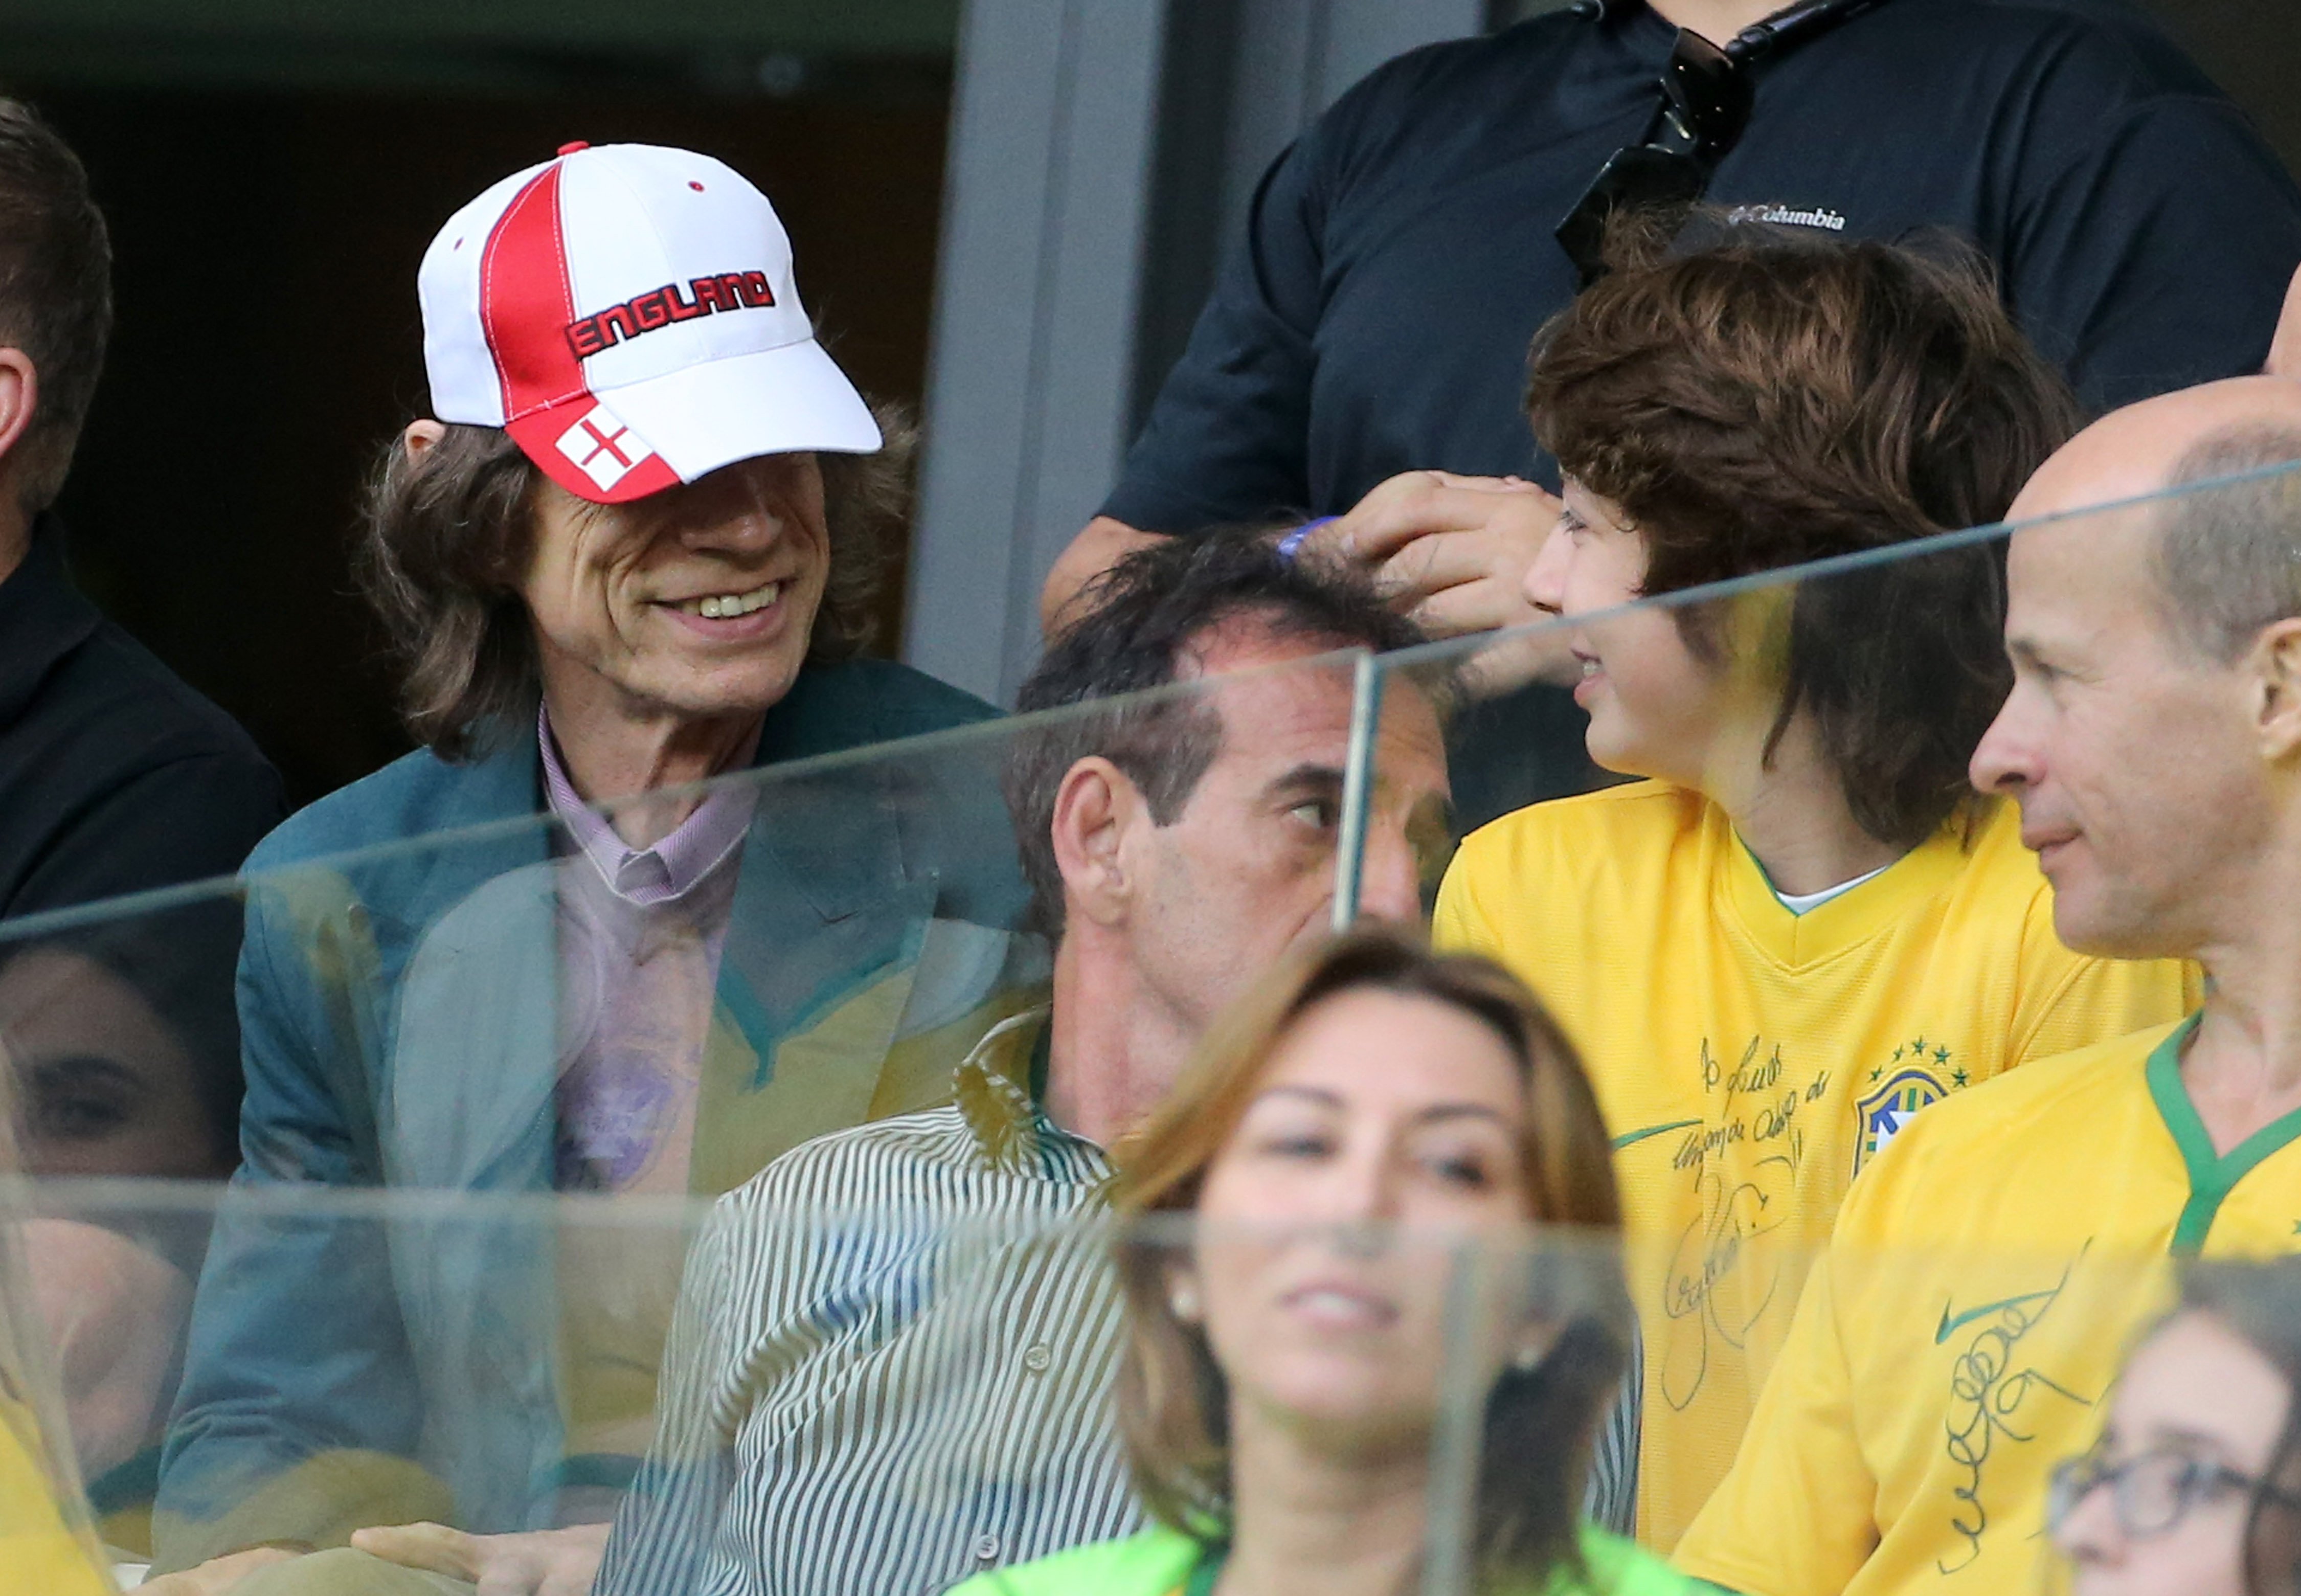 Singer Mick Jagger and his son Lucas Jagger attend the 2014 FIFA World Cup Brazil Semi Final match at Estadio Mineirao on July 8, 2014 in Belo Horizonte, Brazil ┃ Source: Getty Images